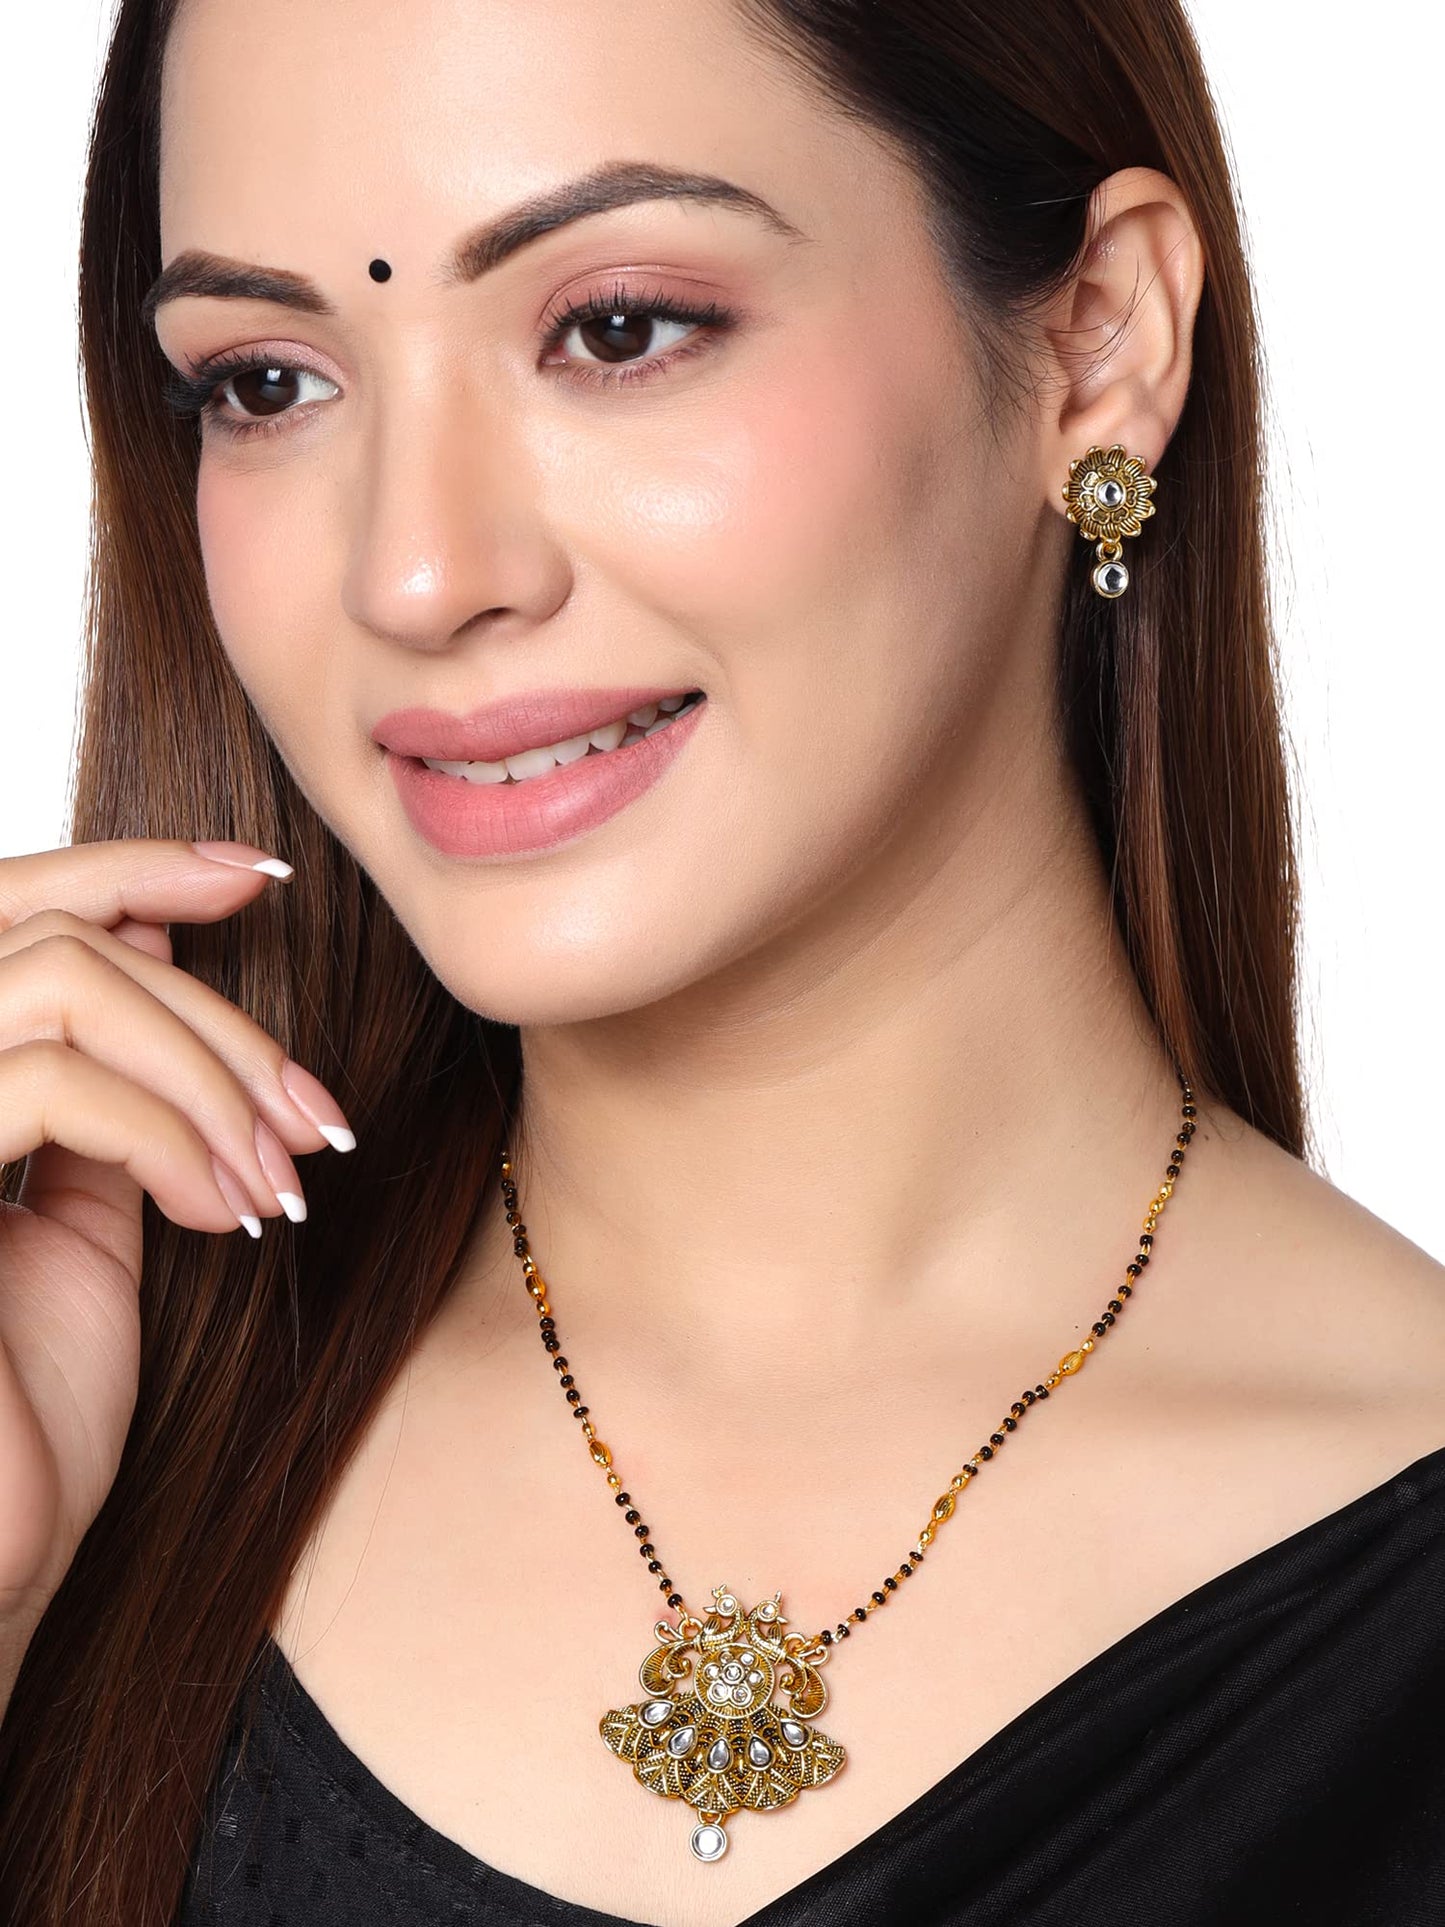 Yellow Chimes Mangalsutra for women Traditional Black Beads Mangalsutra for Women  Gold Plated Peacock Designed Mangalsutra with Earrings  Anniversary Gift for Wife Birthday Gift for Women and Girls